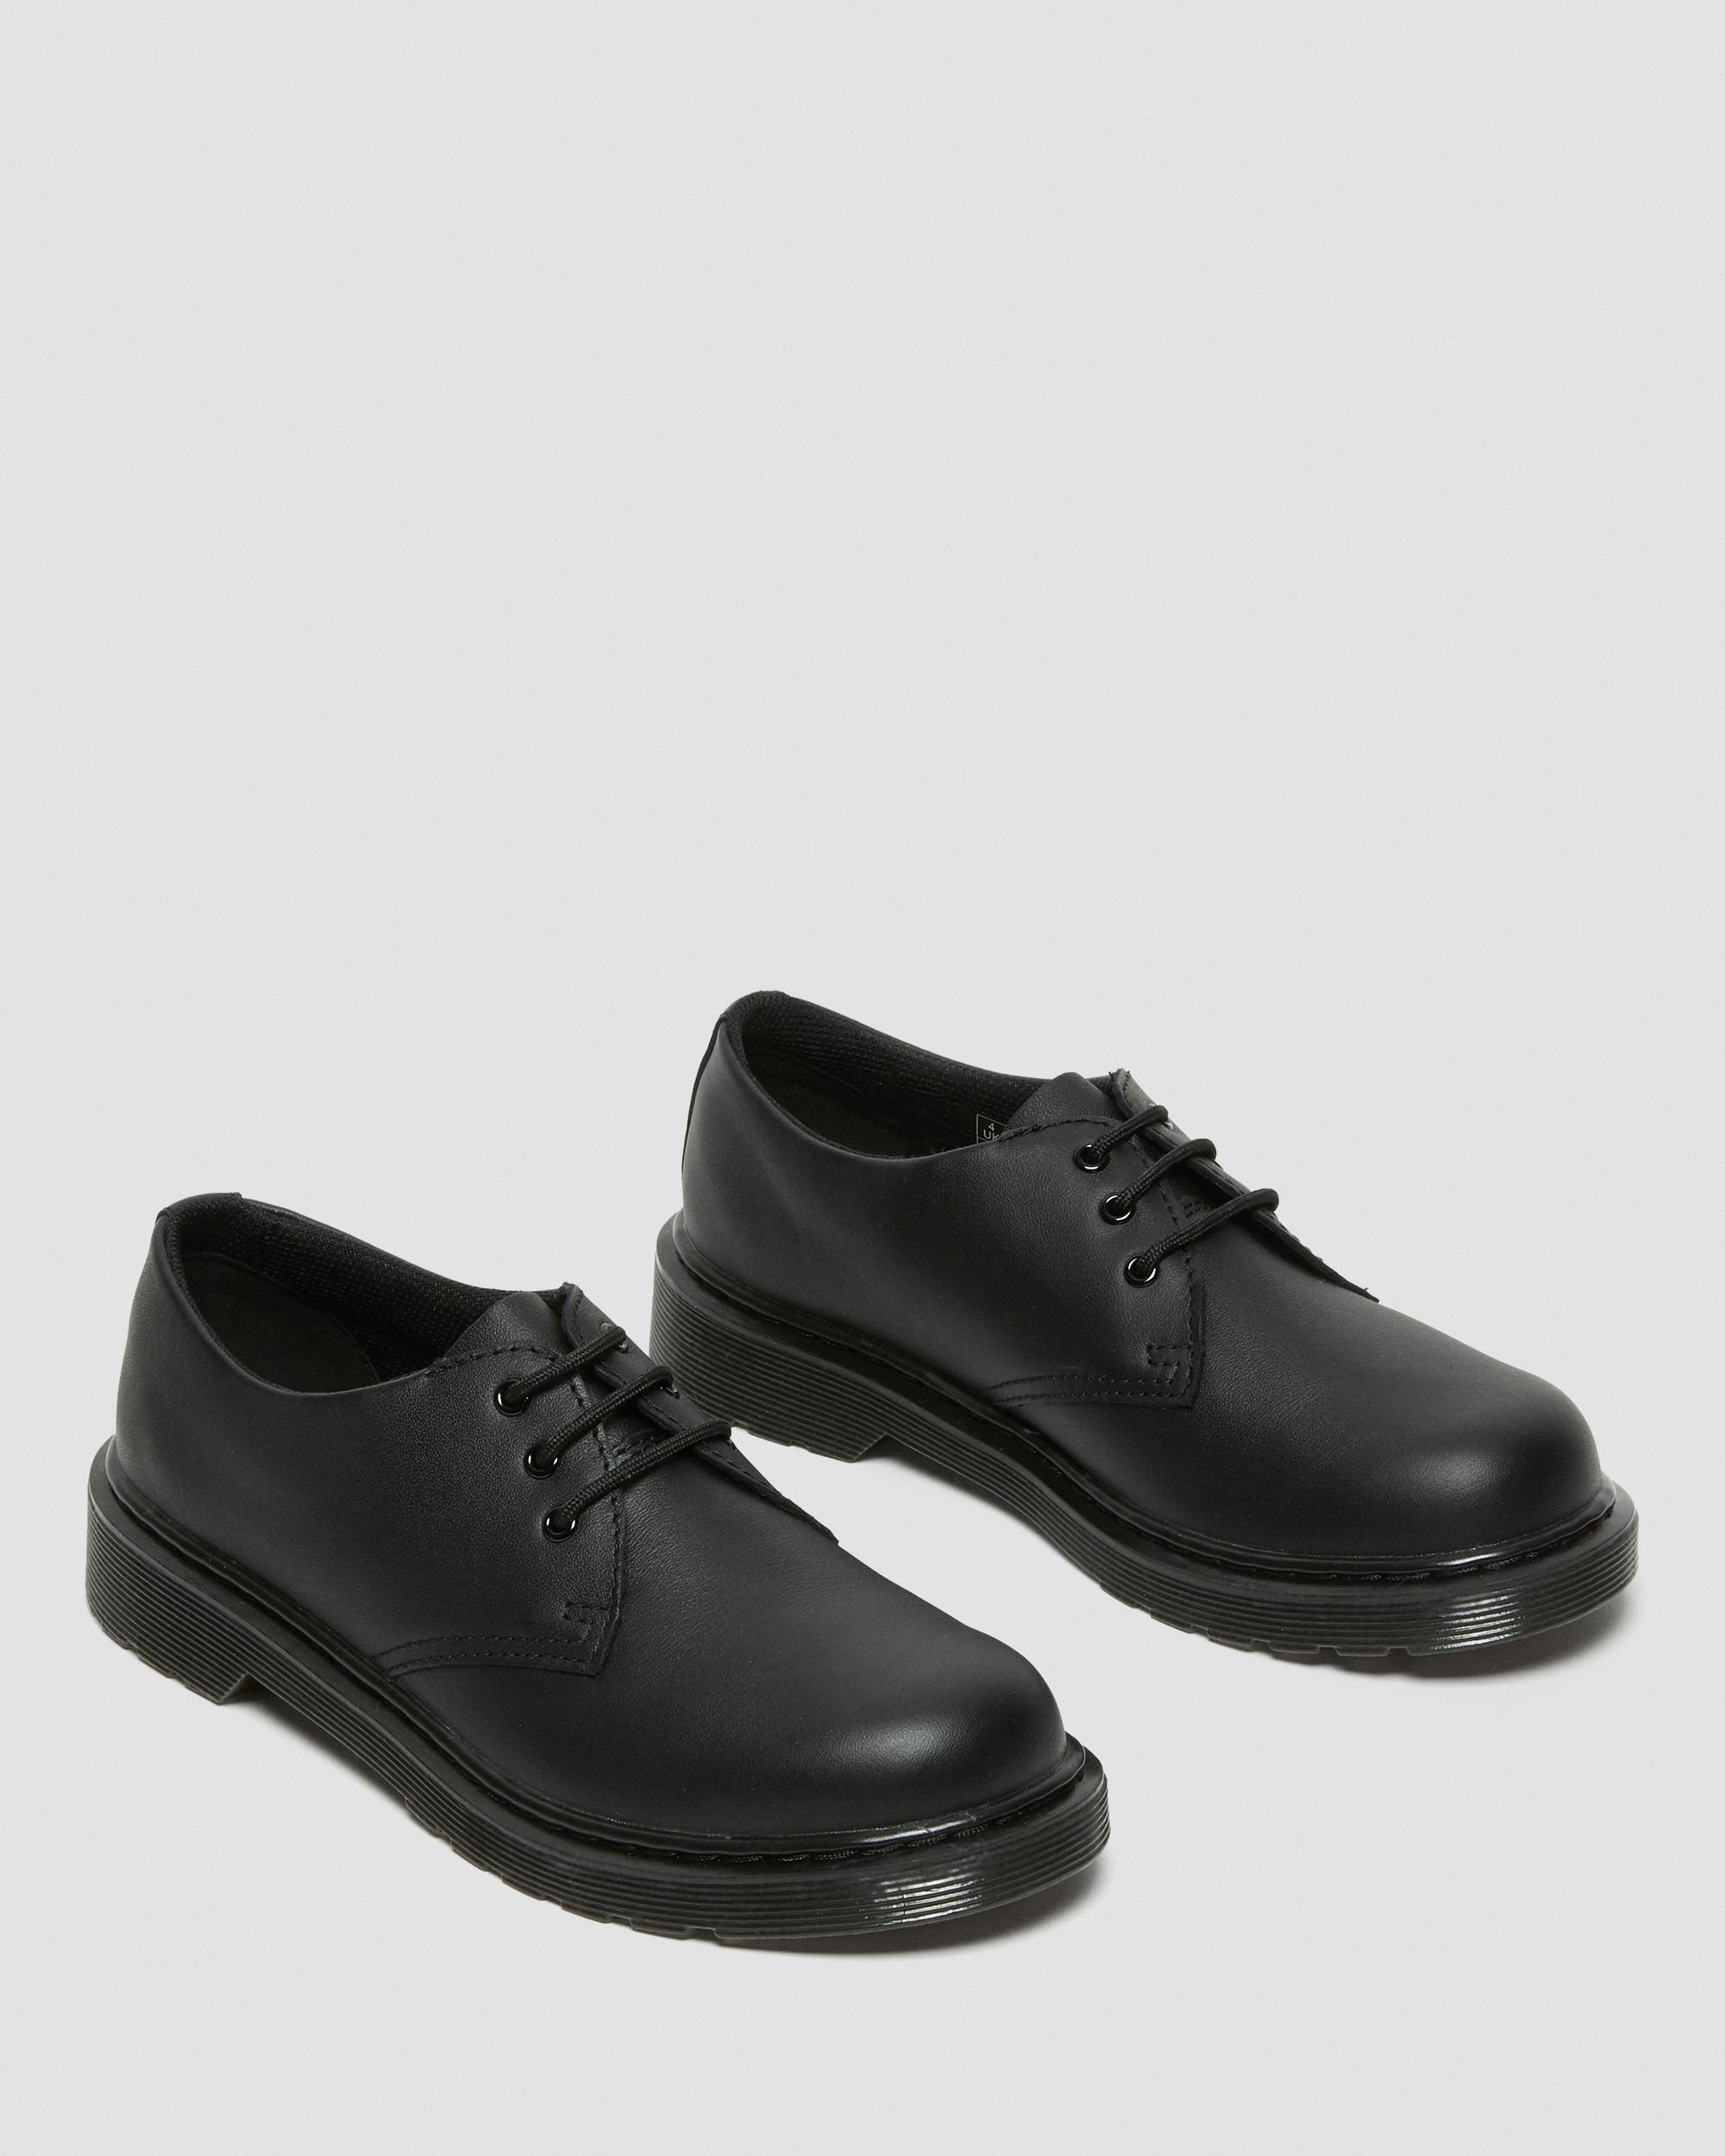 YOUTH 1461 MONO SOFTY T LEATHER SHOES 